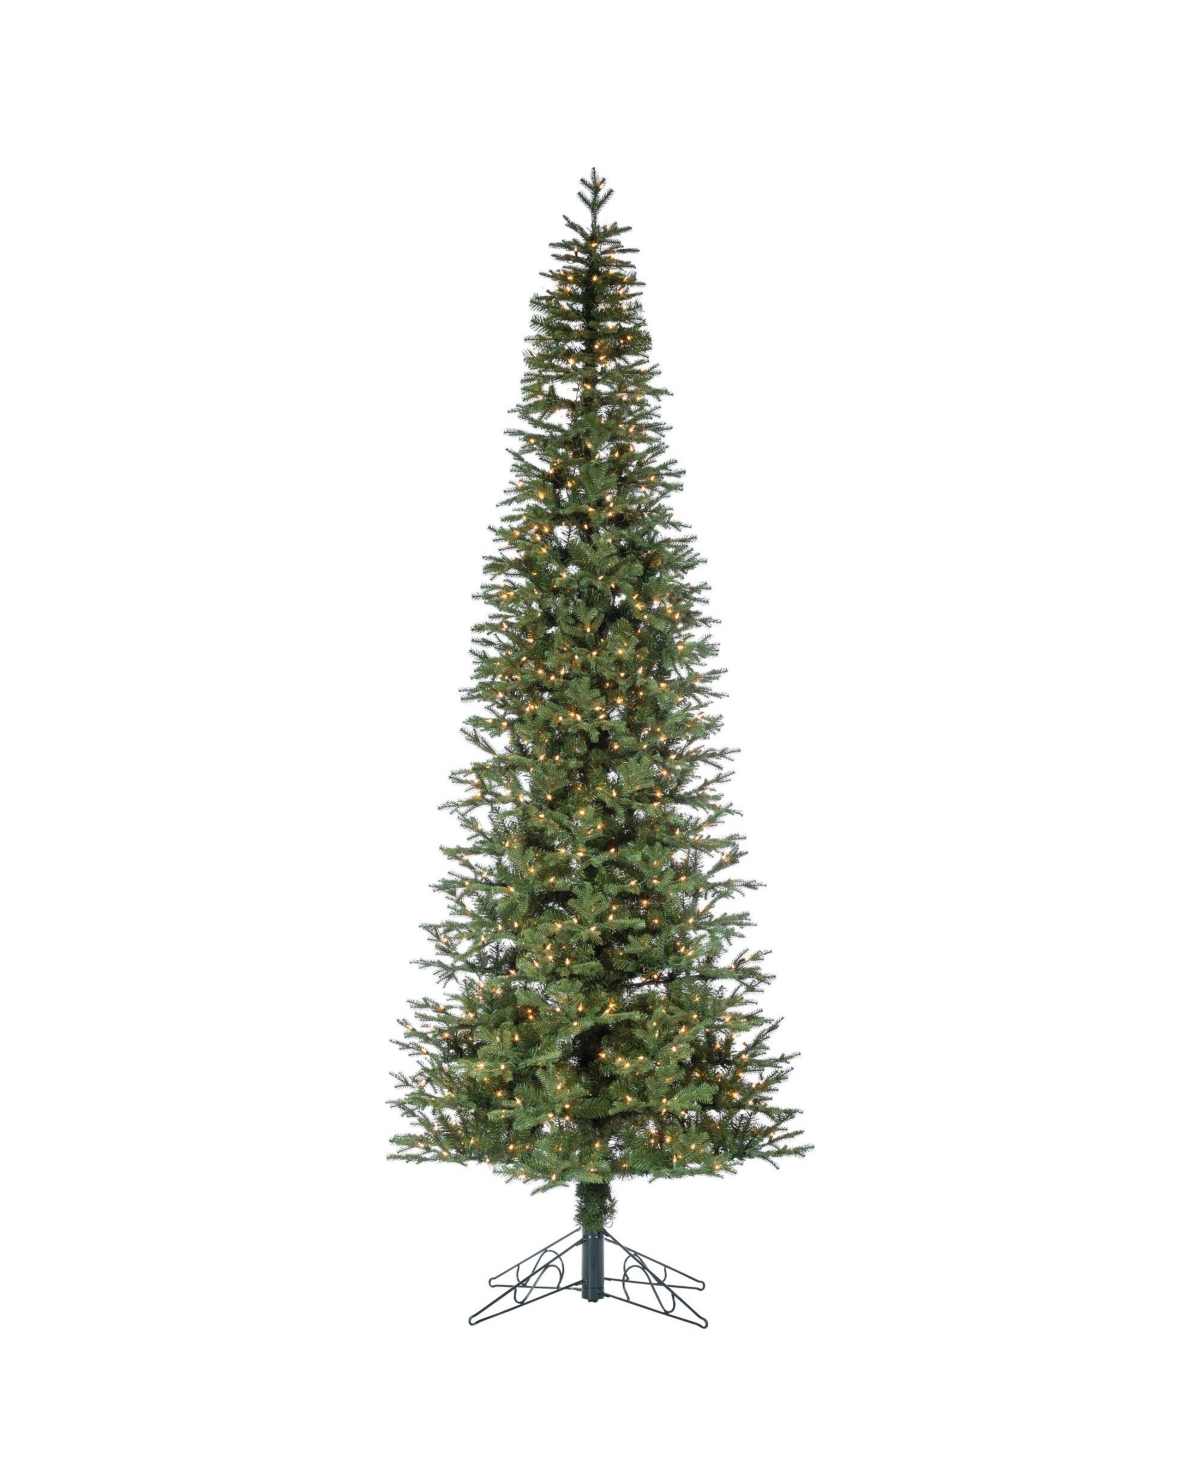 10-Foot High Pre-Lit Natural Cut Narrow Jackson Pine with Clear White Lights - Green